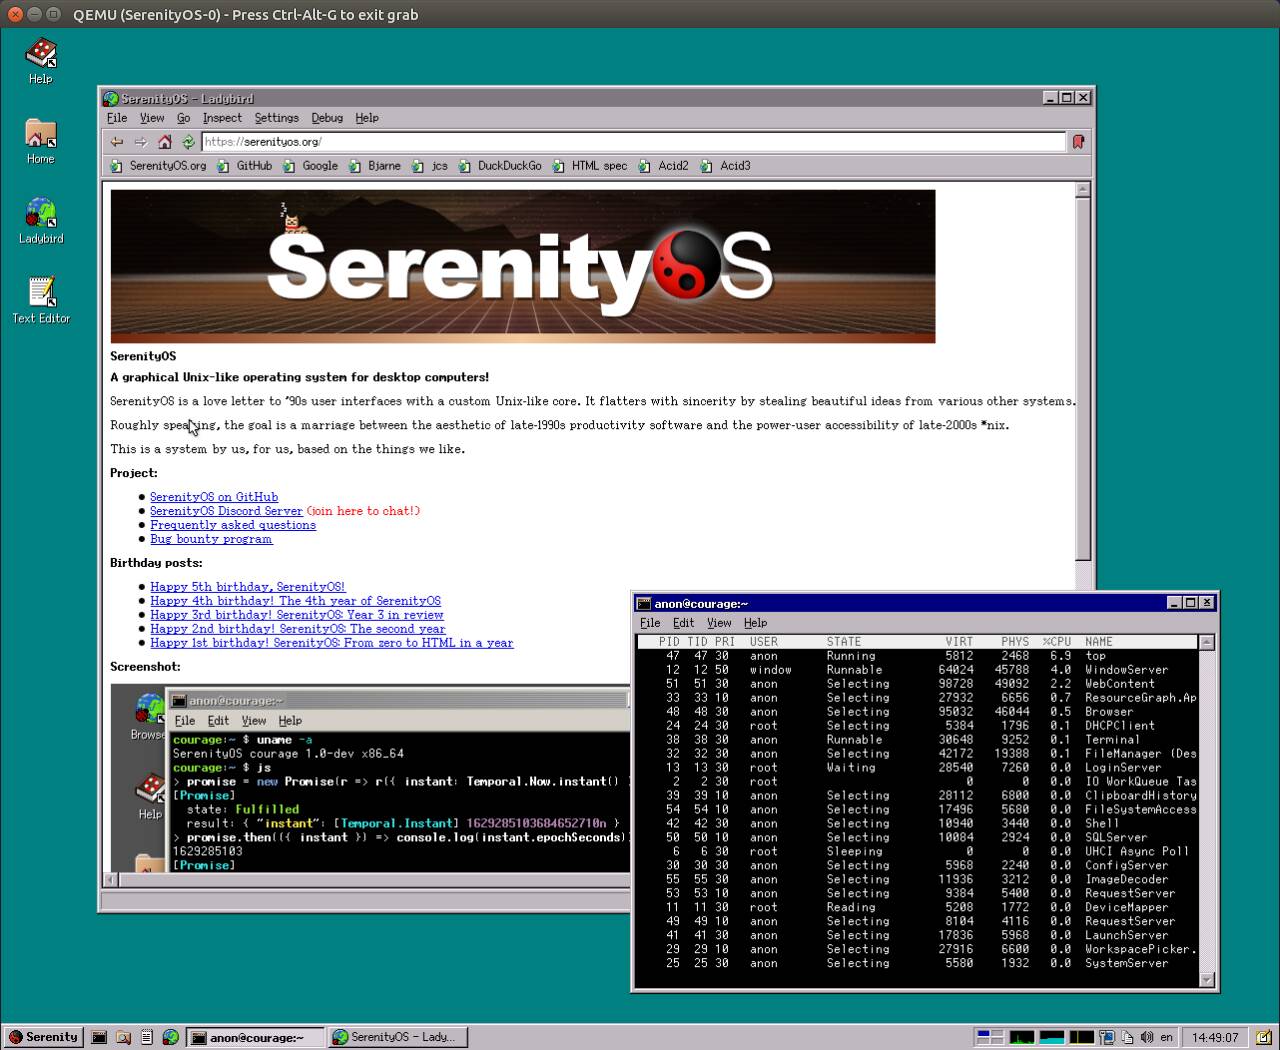 Serenity is a pleasing combination of a classic-Windows-like UI and some of the simplicity that Unix once had, decades ago.